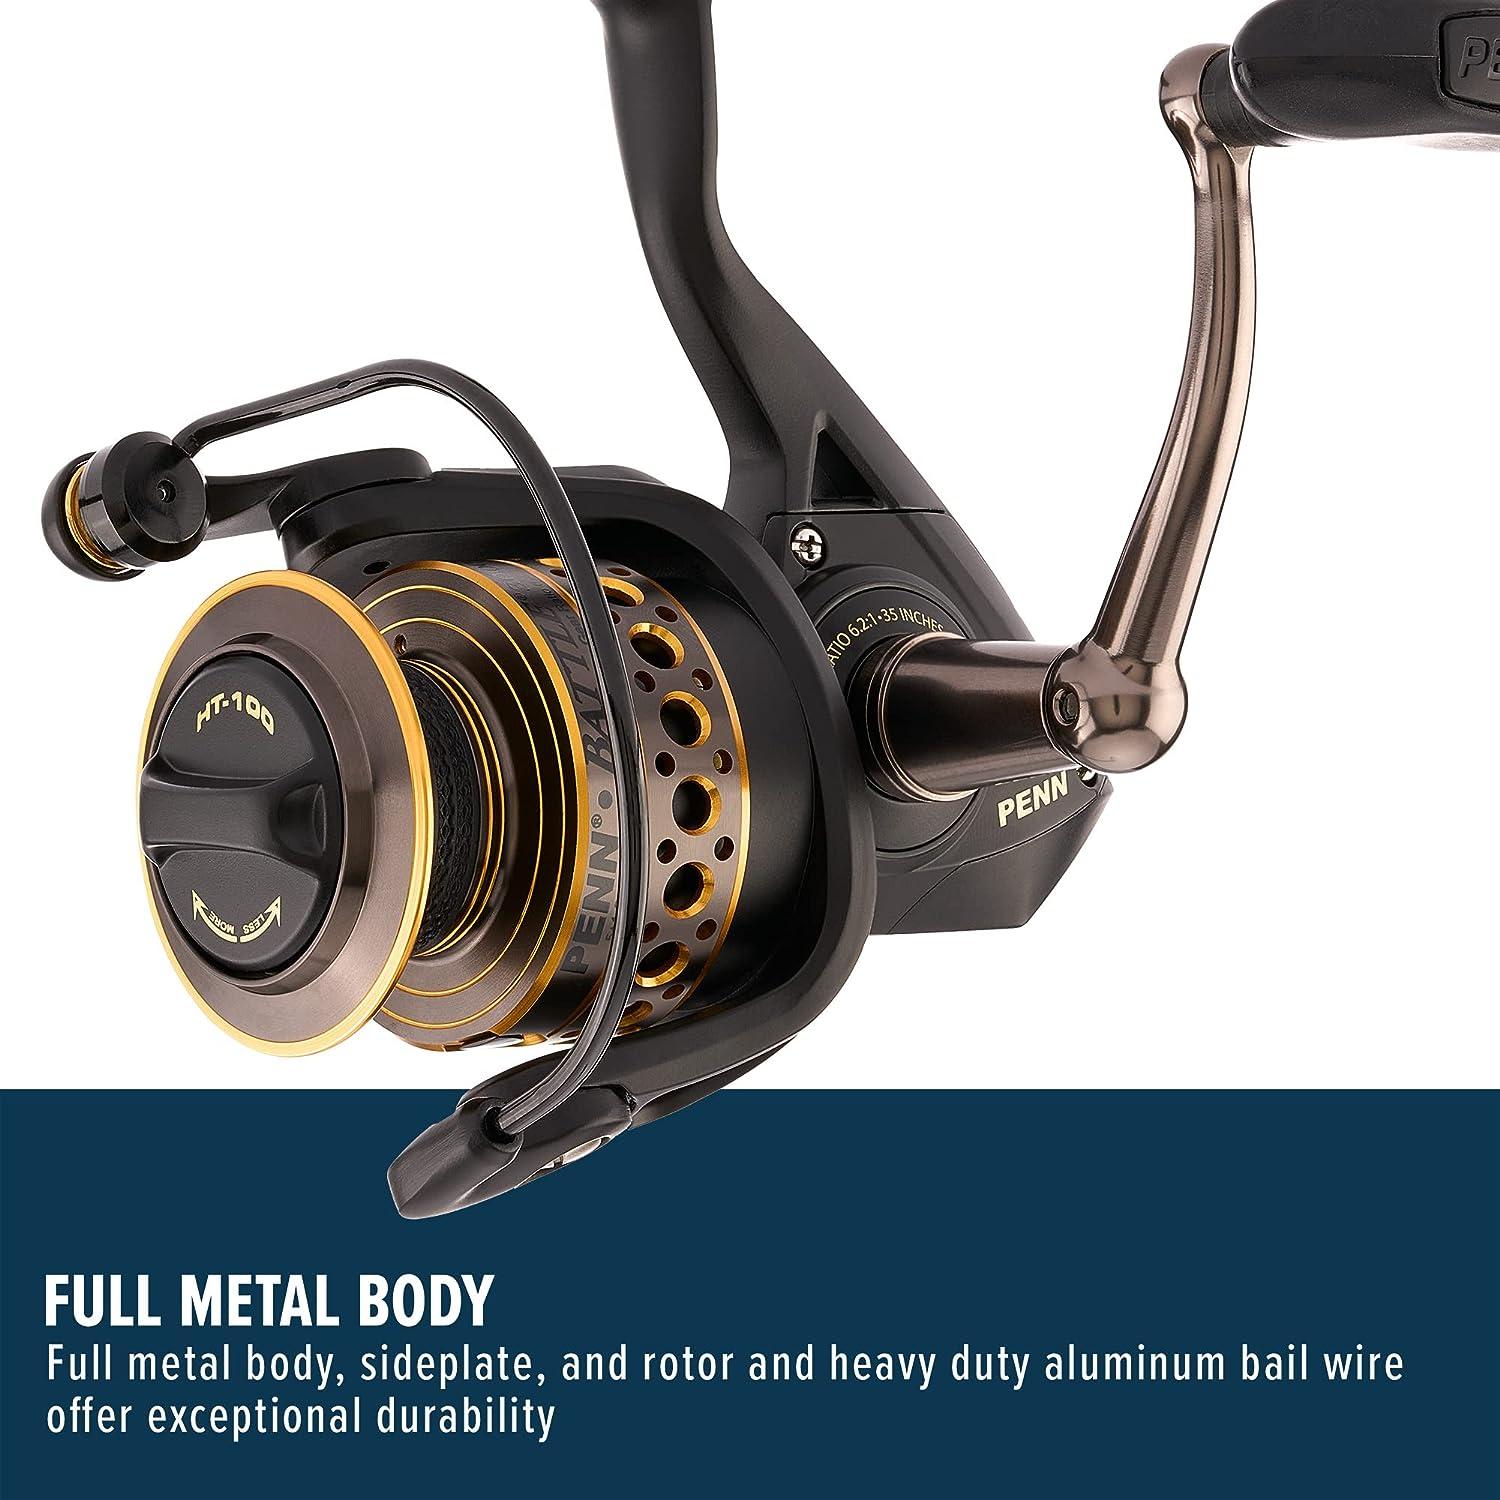 PENN Battle Spinning Reel Kit, Size 5000, Includes Reel Cover and